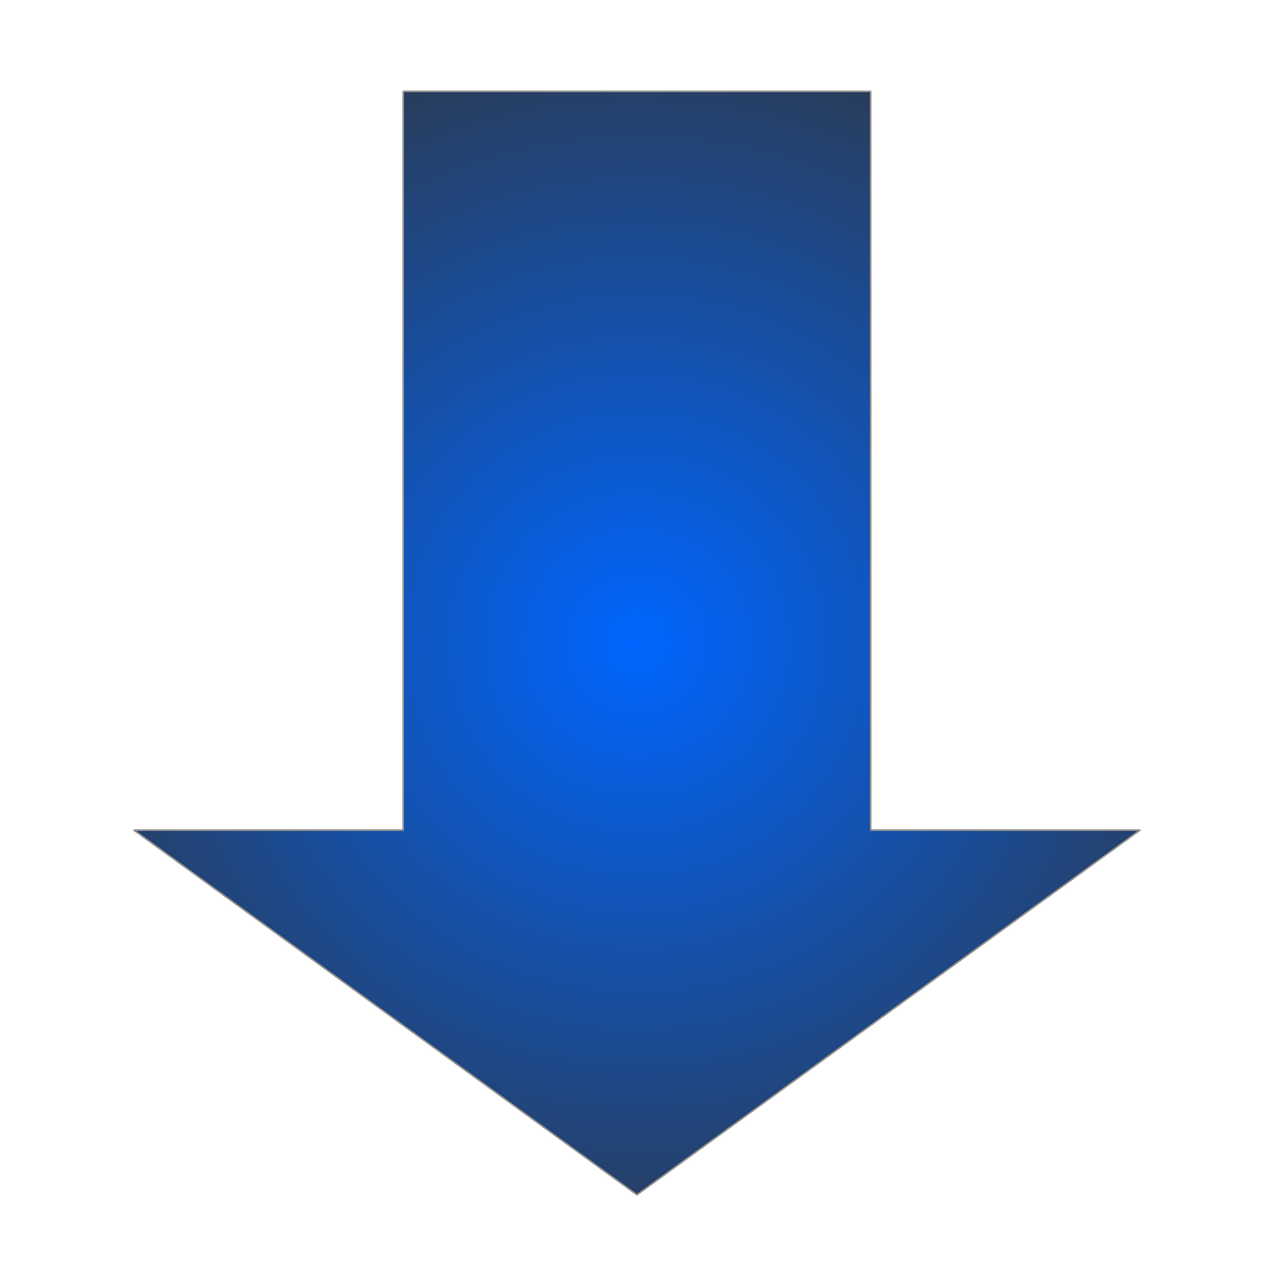 a blue arrow pointing upward on a black background, a stock photo, deviantart, computer art, topdown, head down, no outline, rectangle